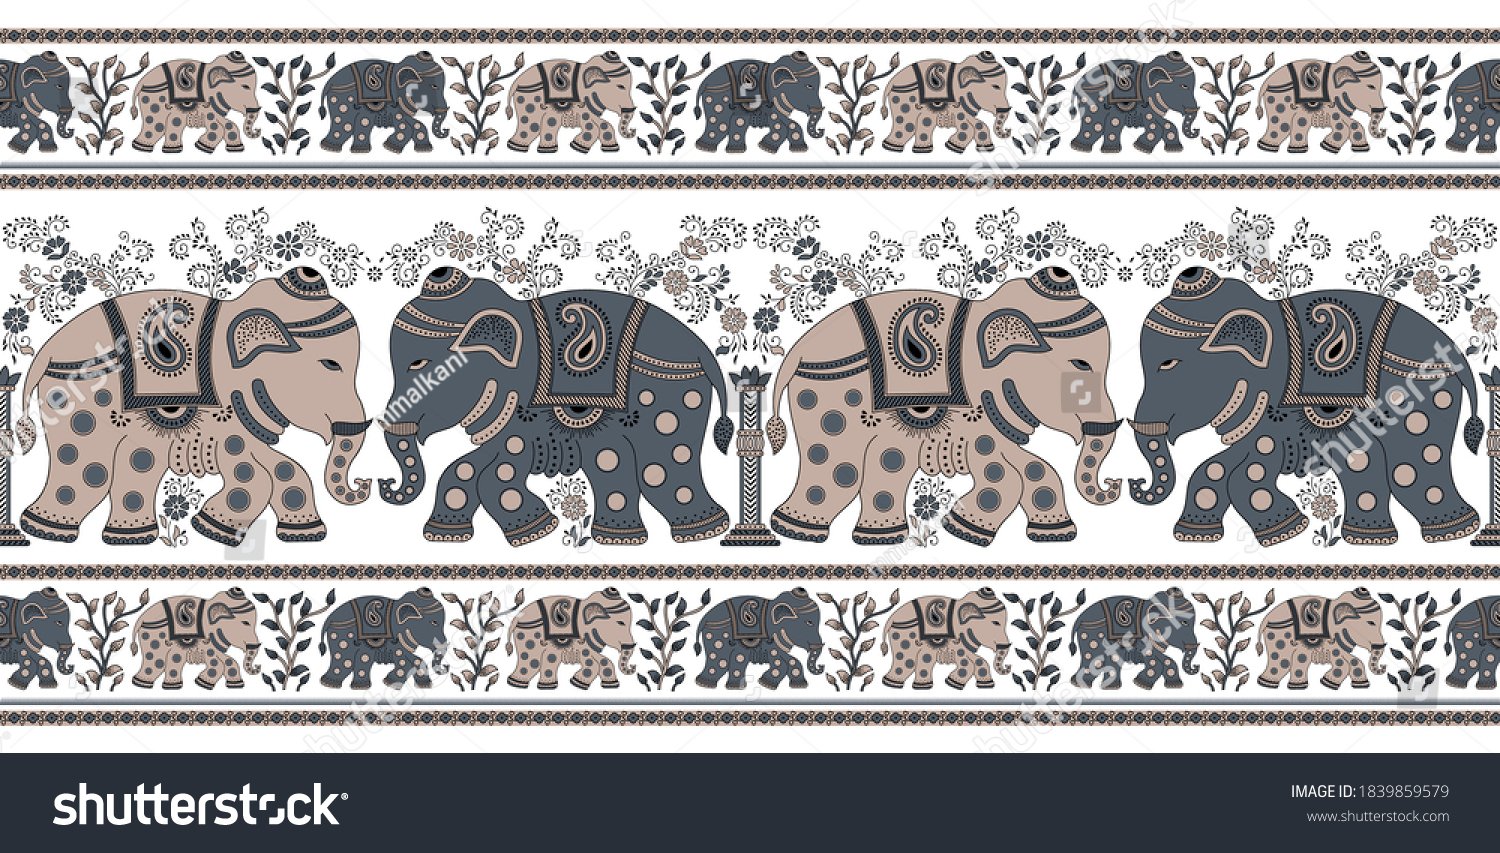 SVG of Seamless traditional Asian elephant border svg